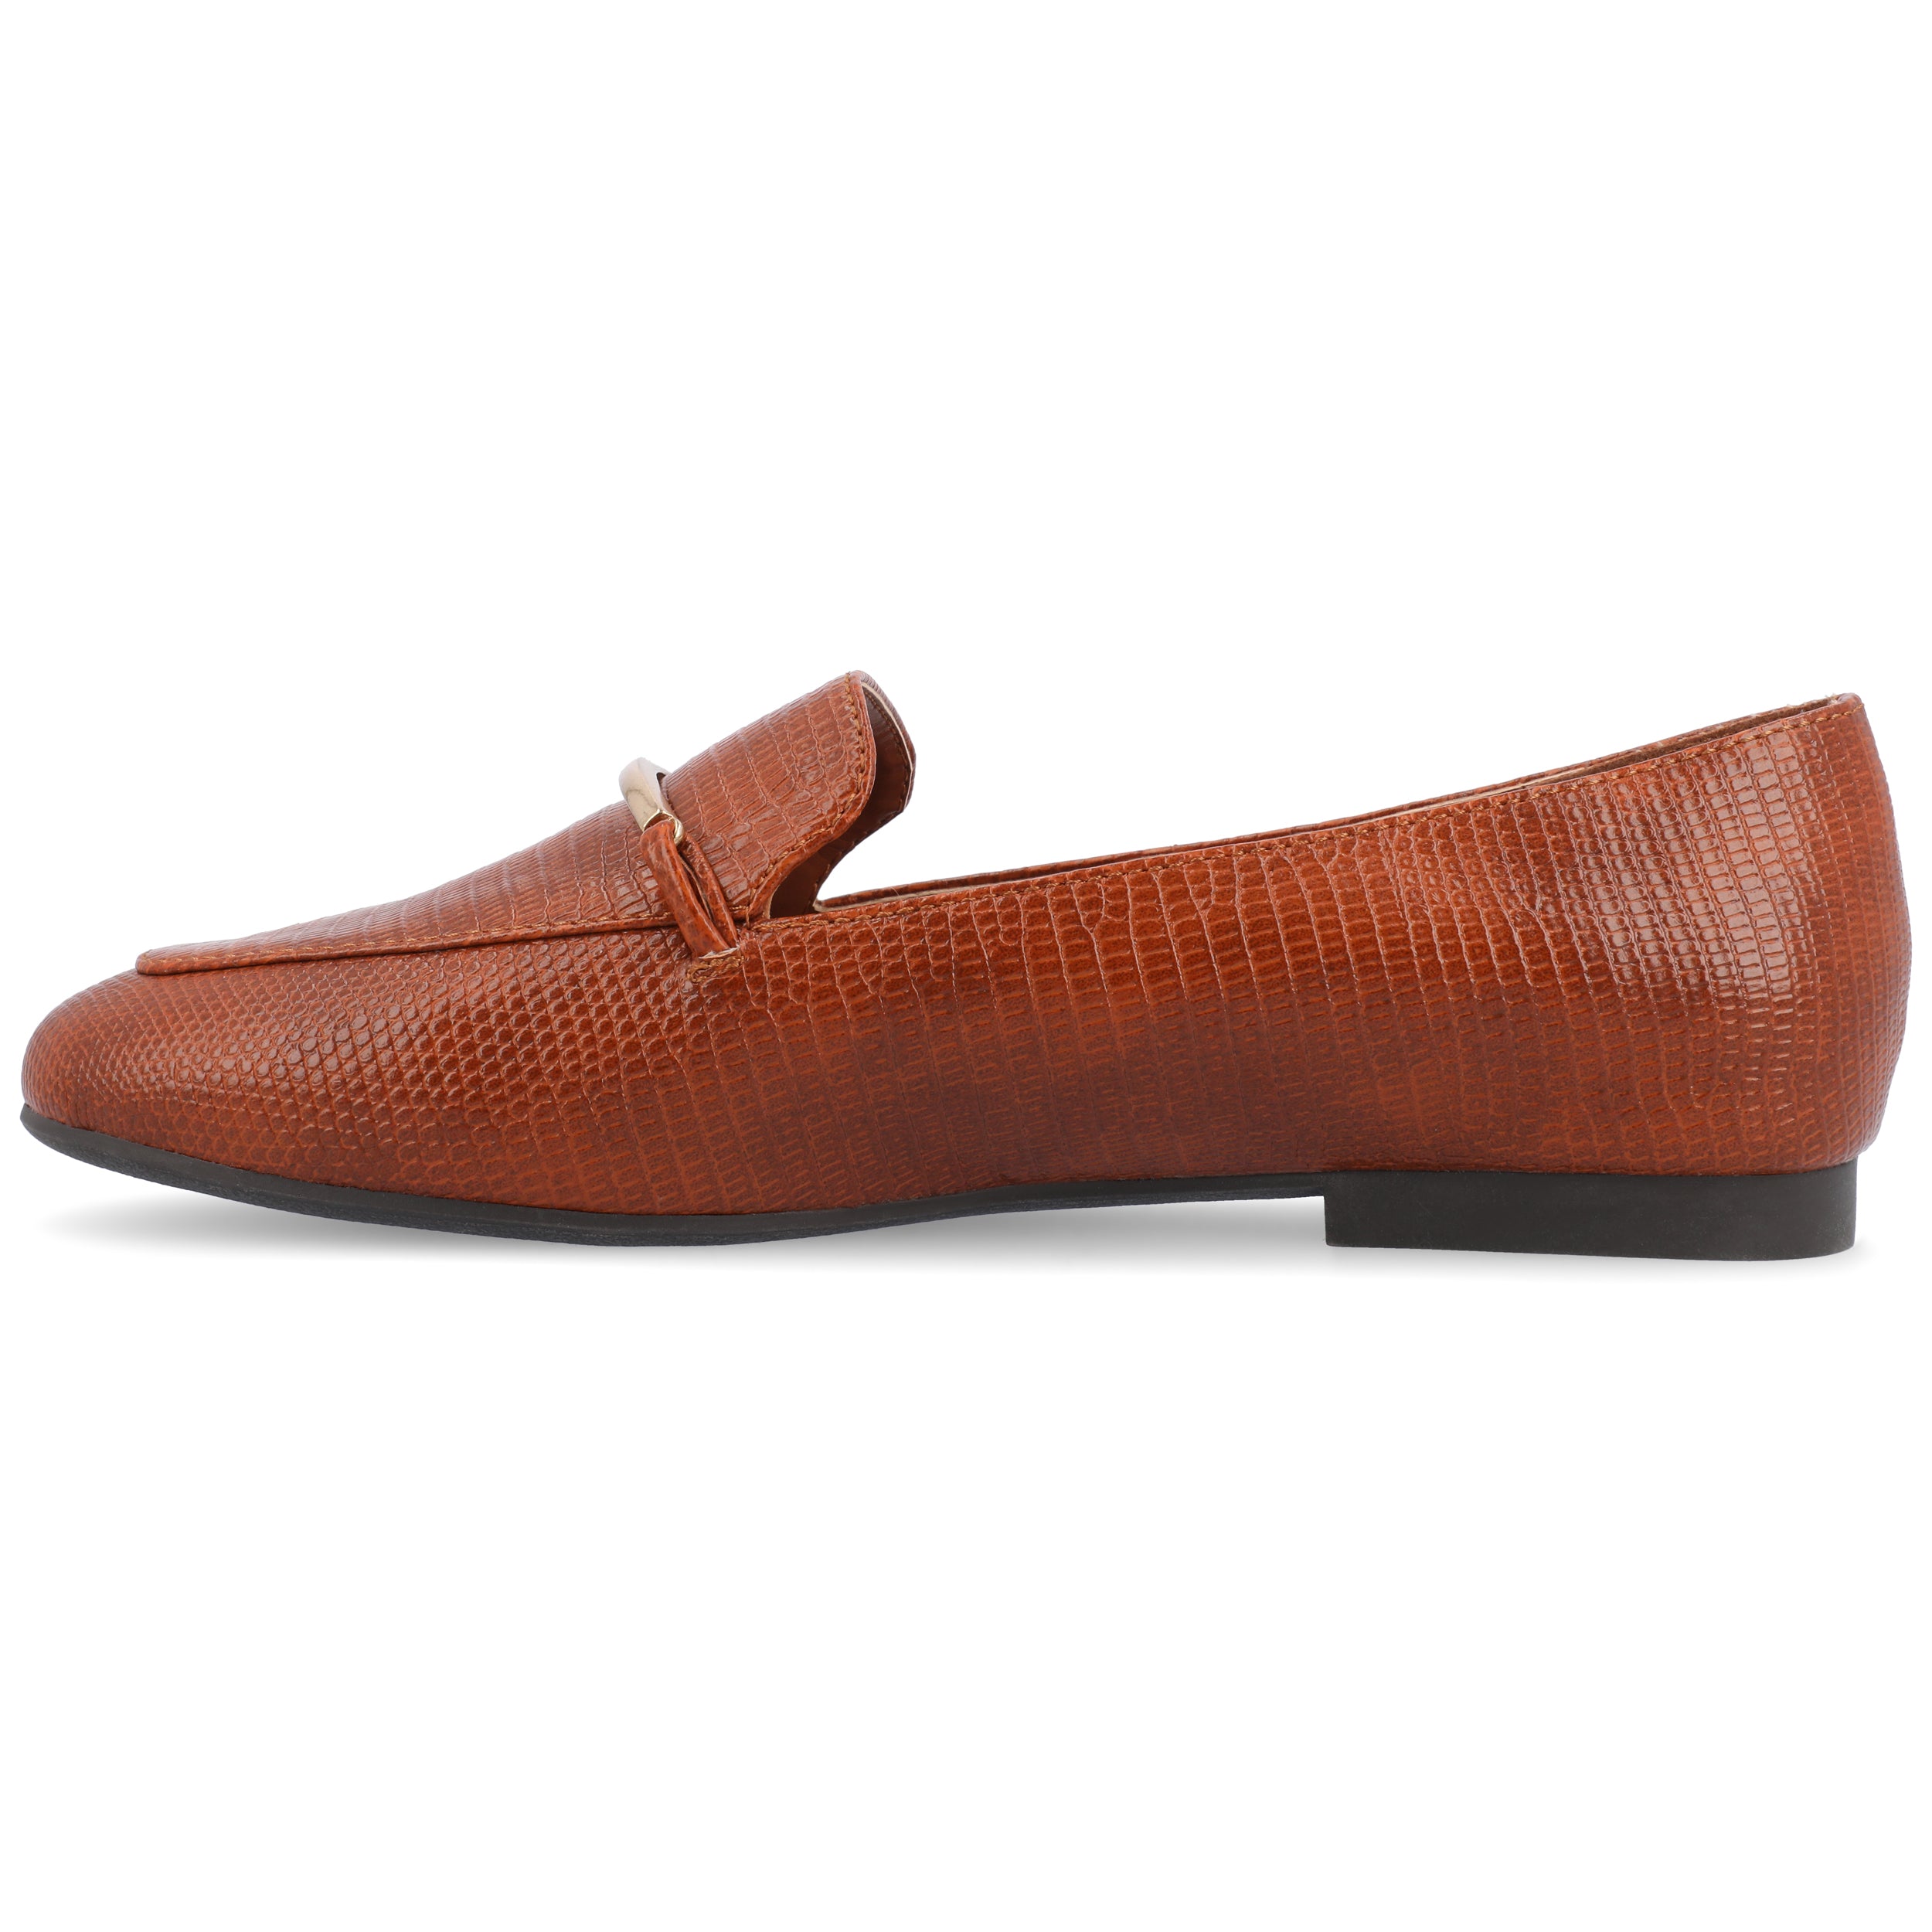 WRENN LOAFER FLATS IN STATEMENT – Journee Collection